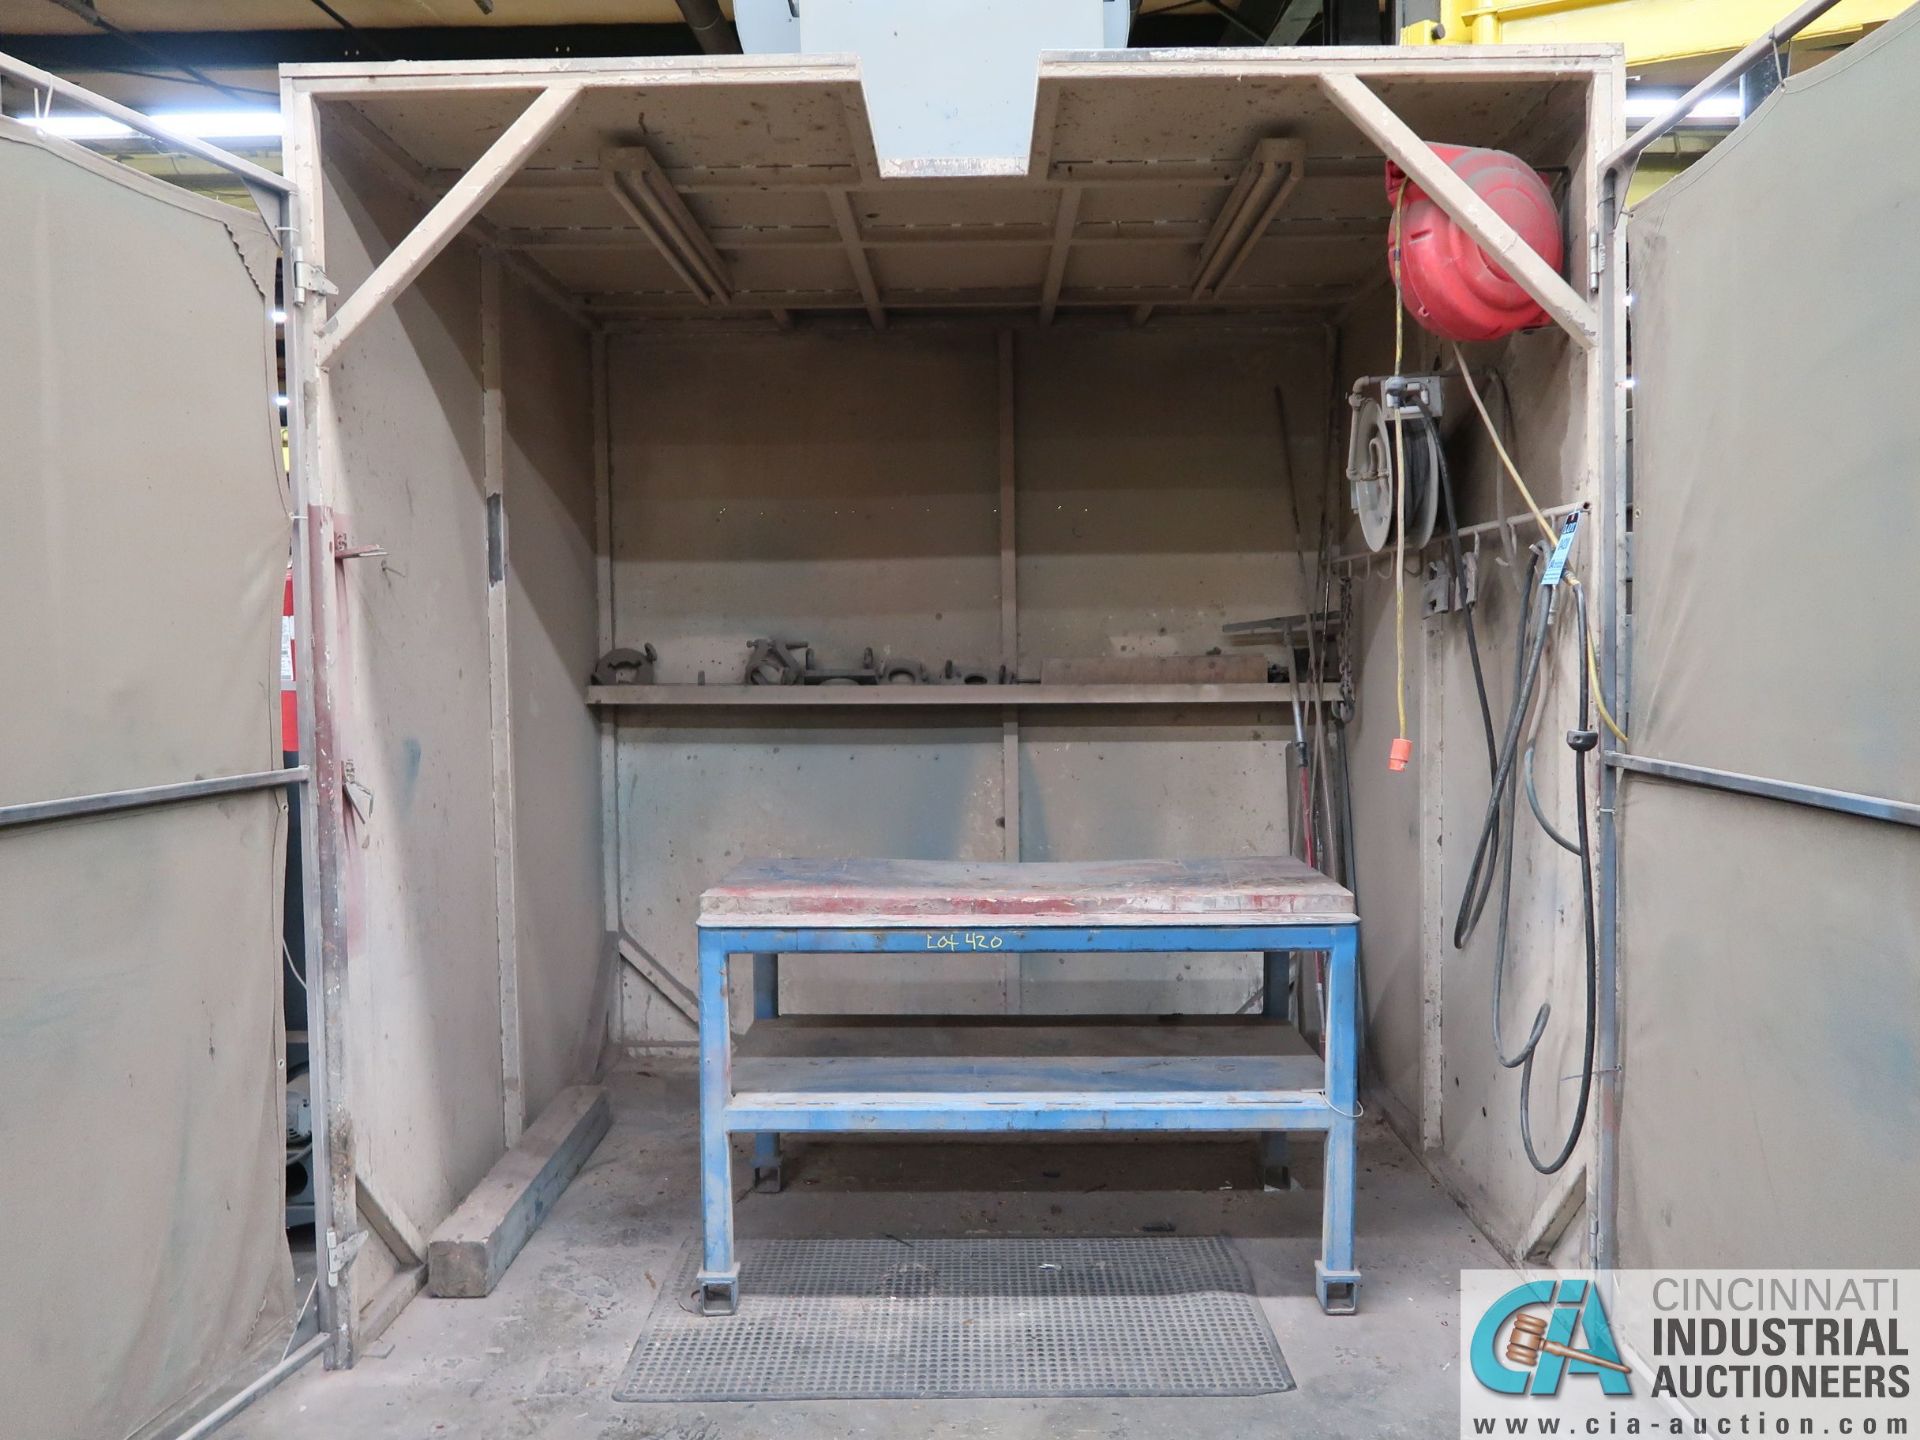 9' X 8' X 9' BOLT TOGETHER REAR EXHAUST GRINDING BOOTH